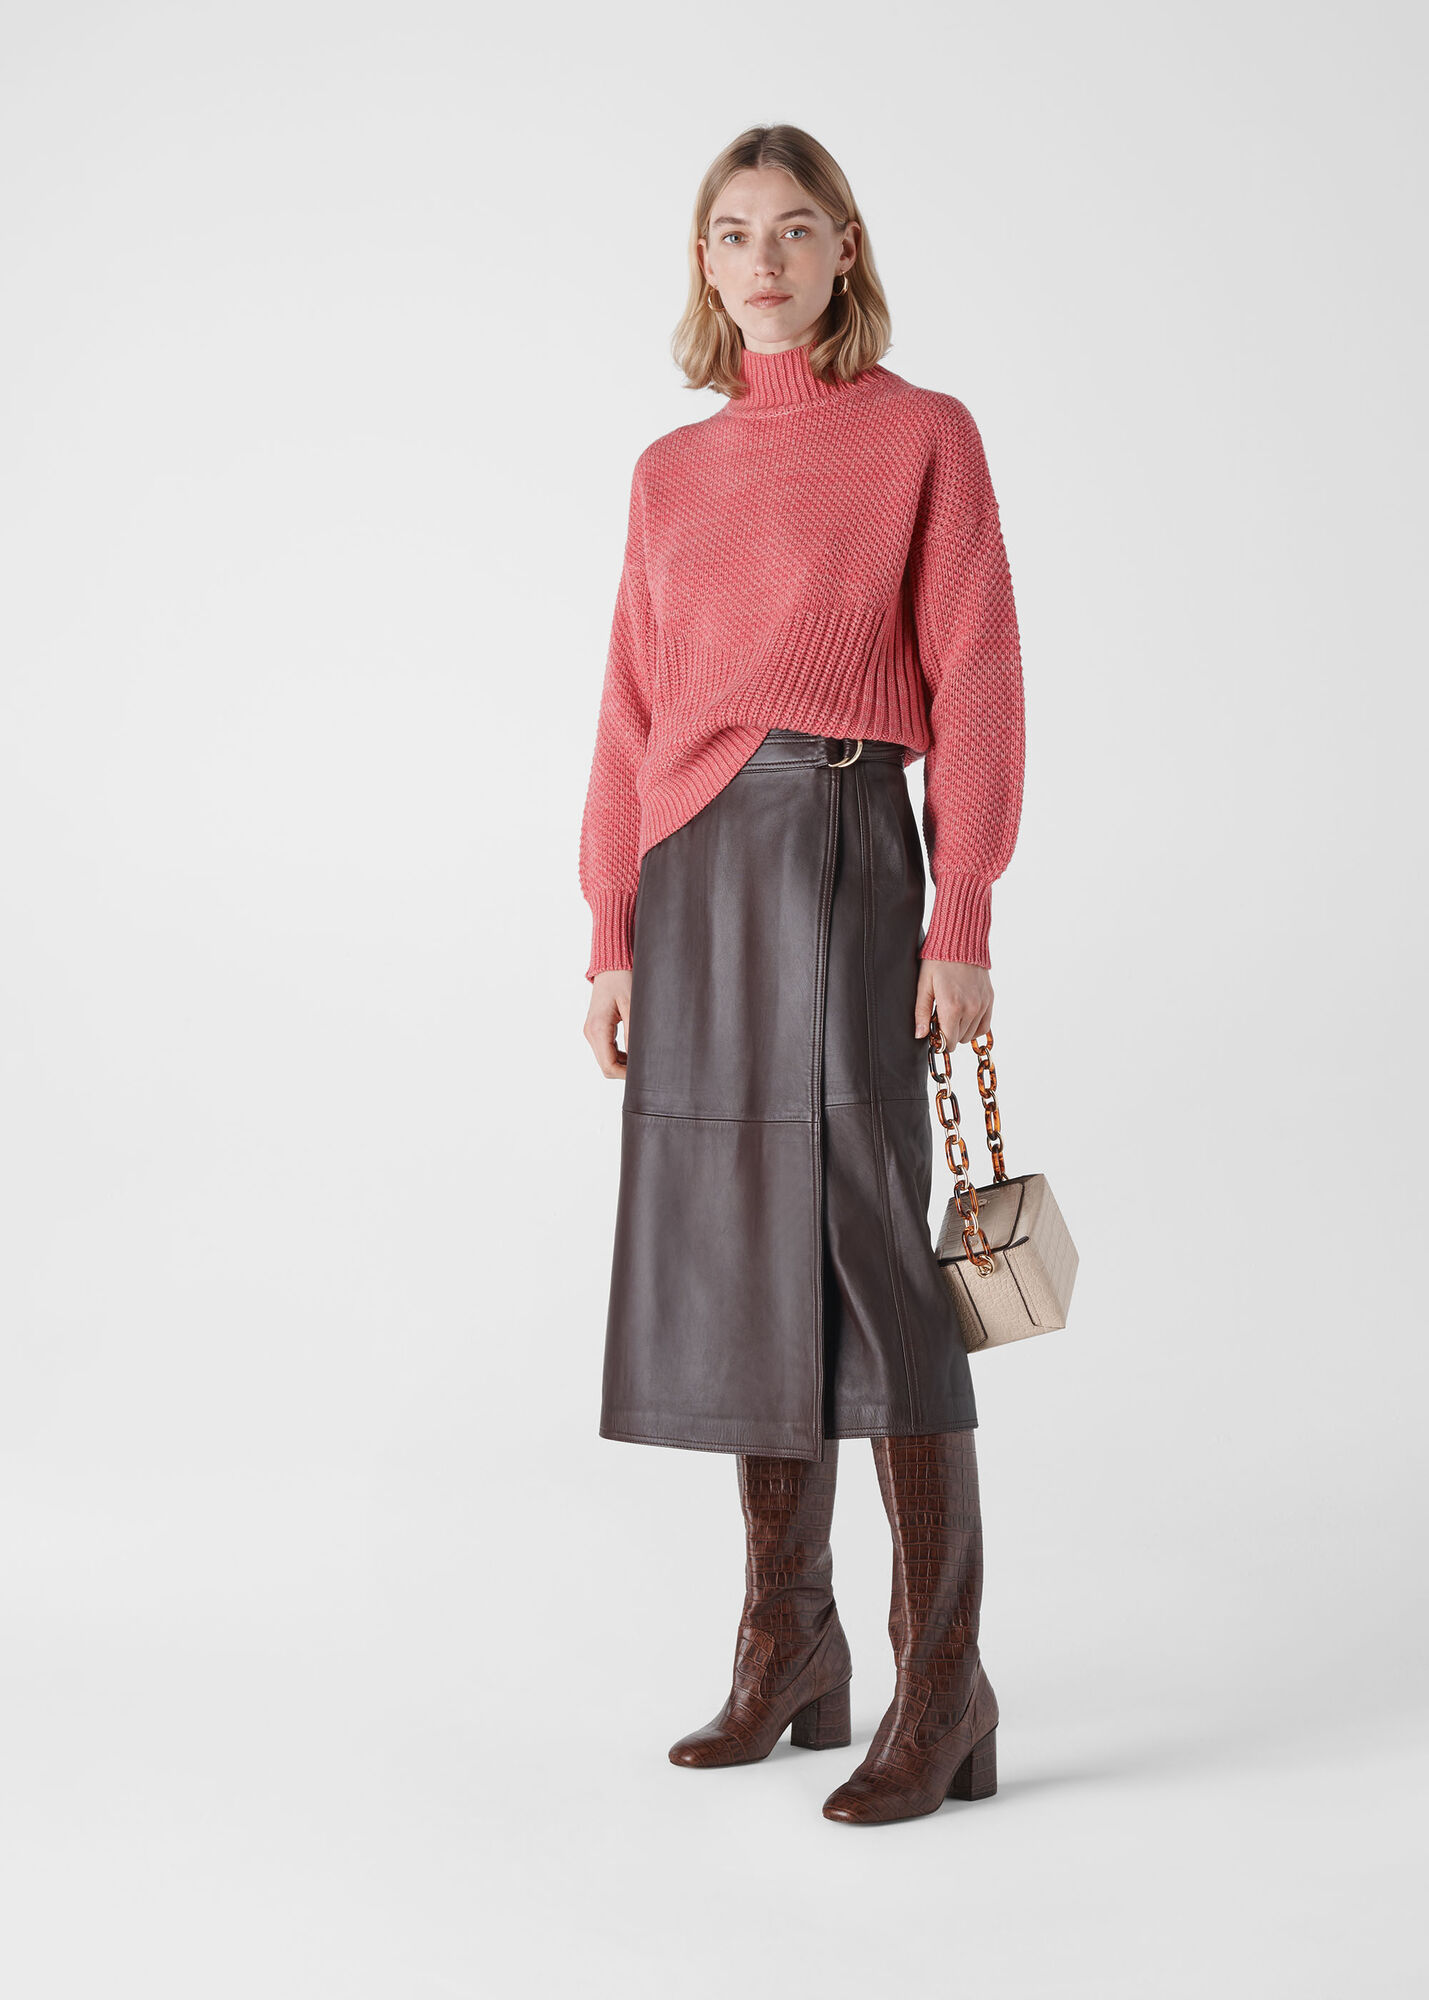 Pink Moss Stitch Textured Knit | WHISTLES | Whistles UK